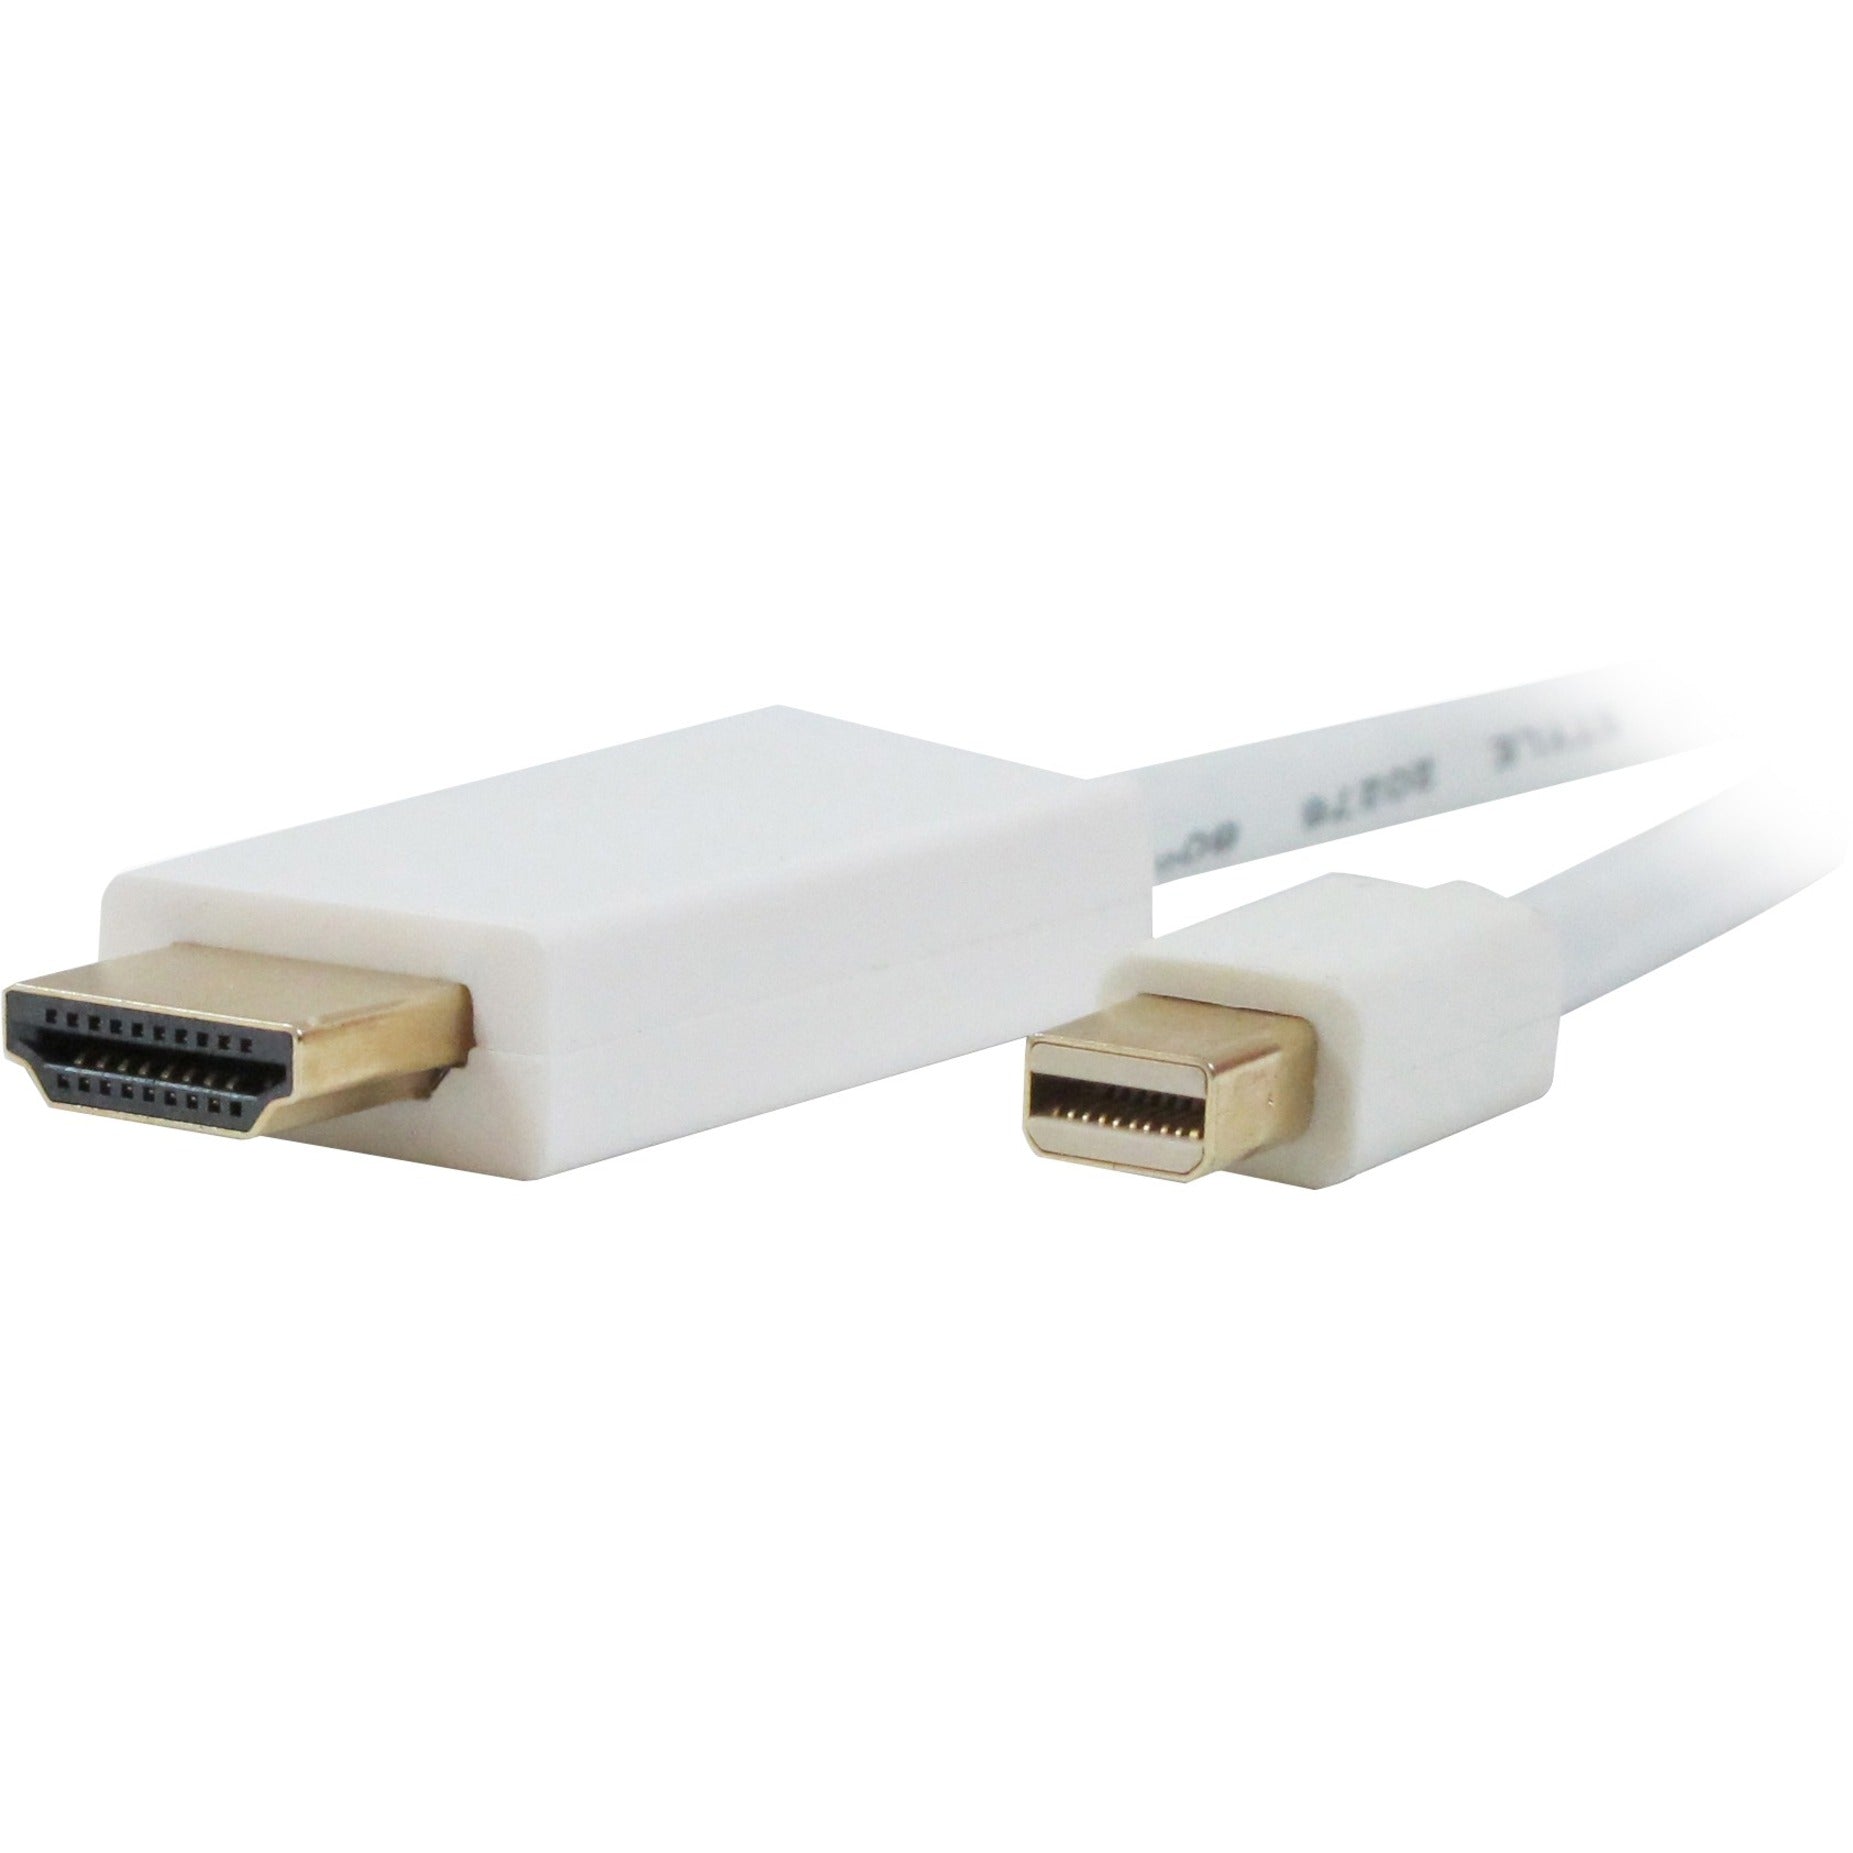 Comprehensive MDP-HD-10ST Mini DisplayPort Male to HDMI Male Cable 10ft, High-Speed Data Transfer, Lifetime Warranty